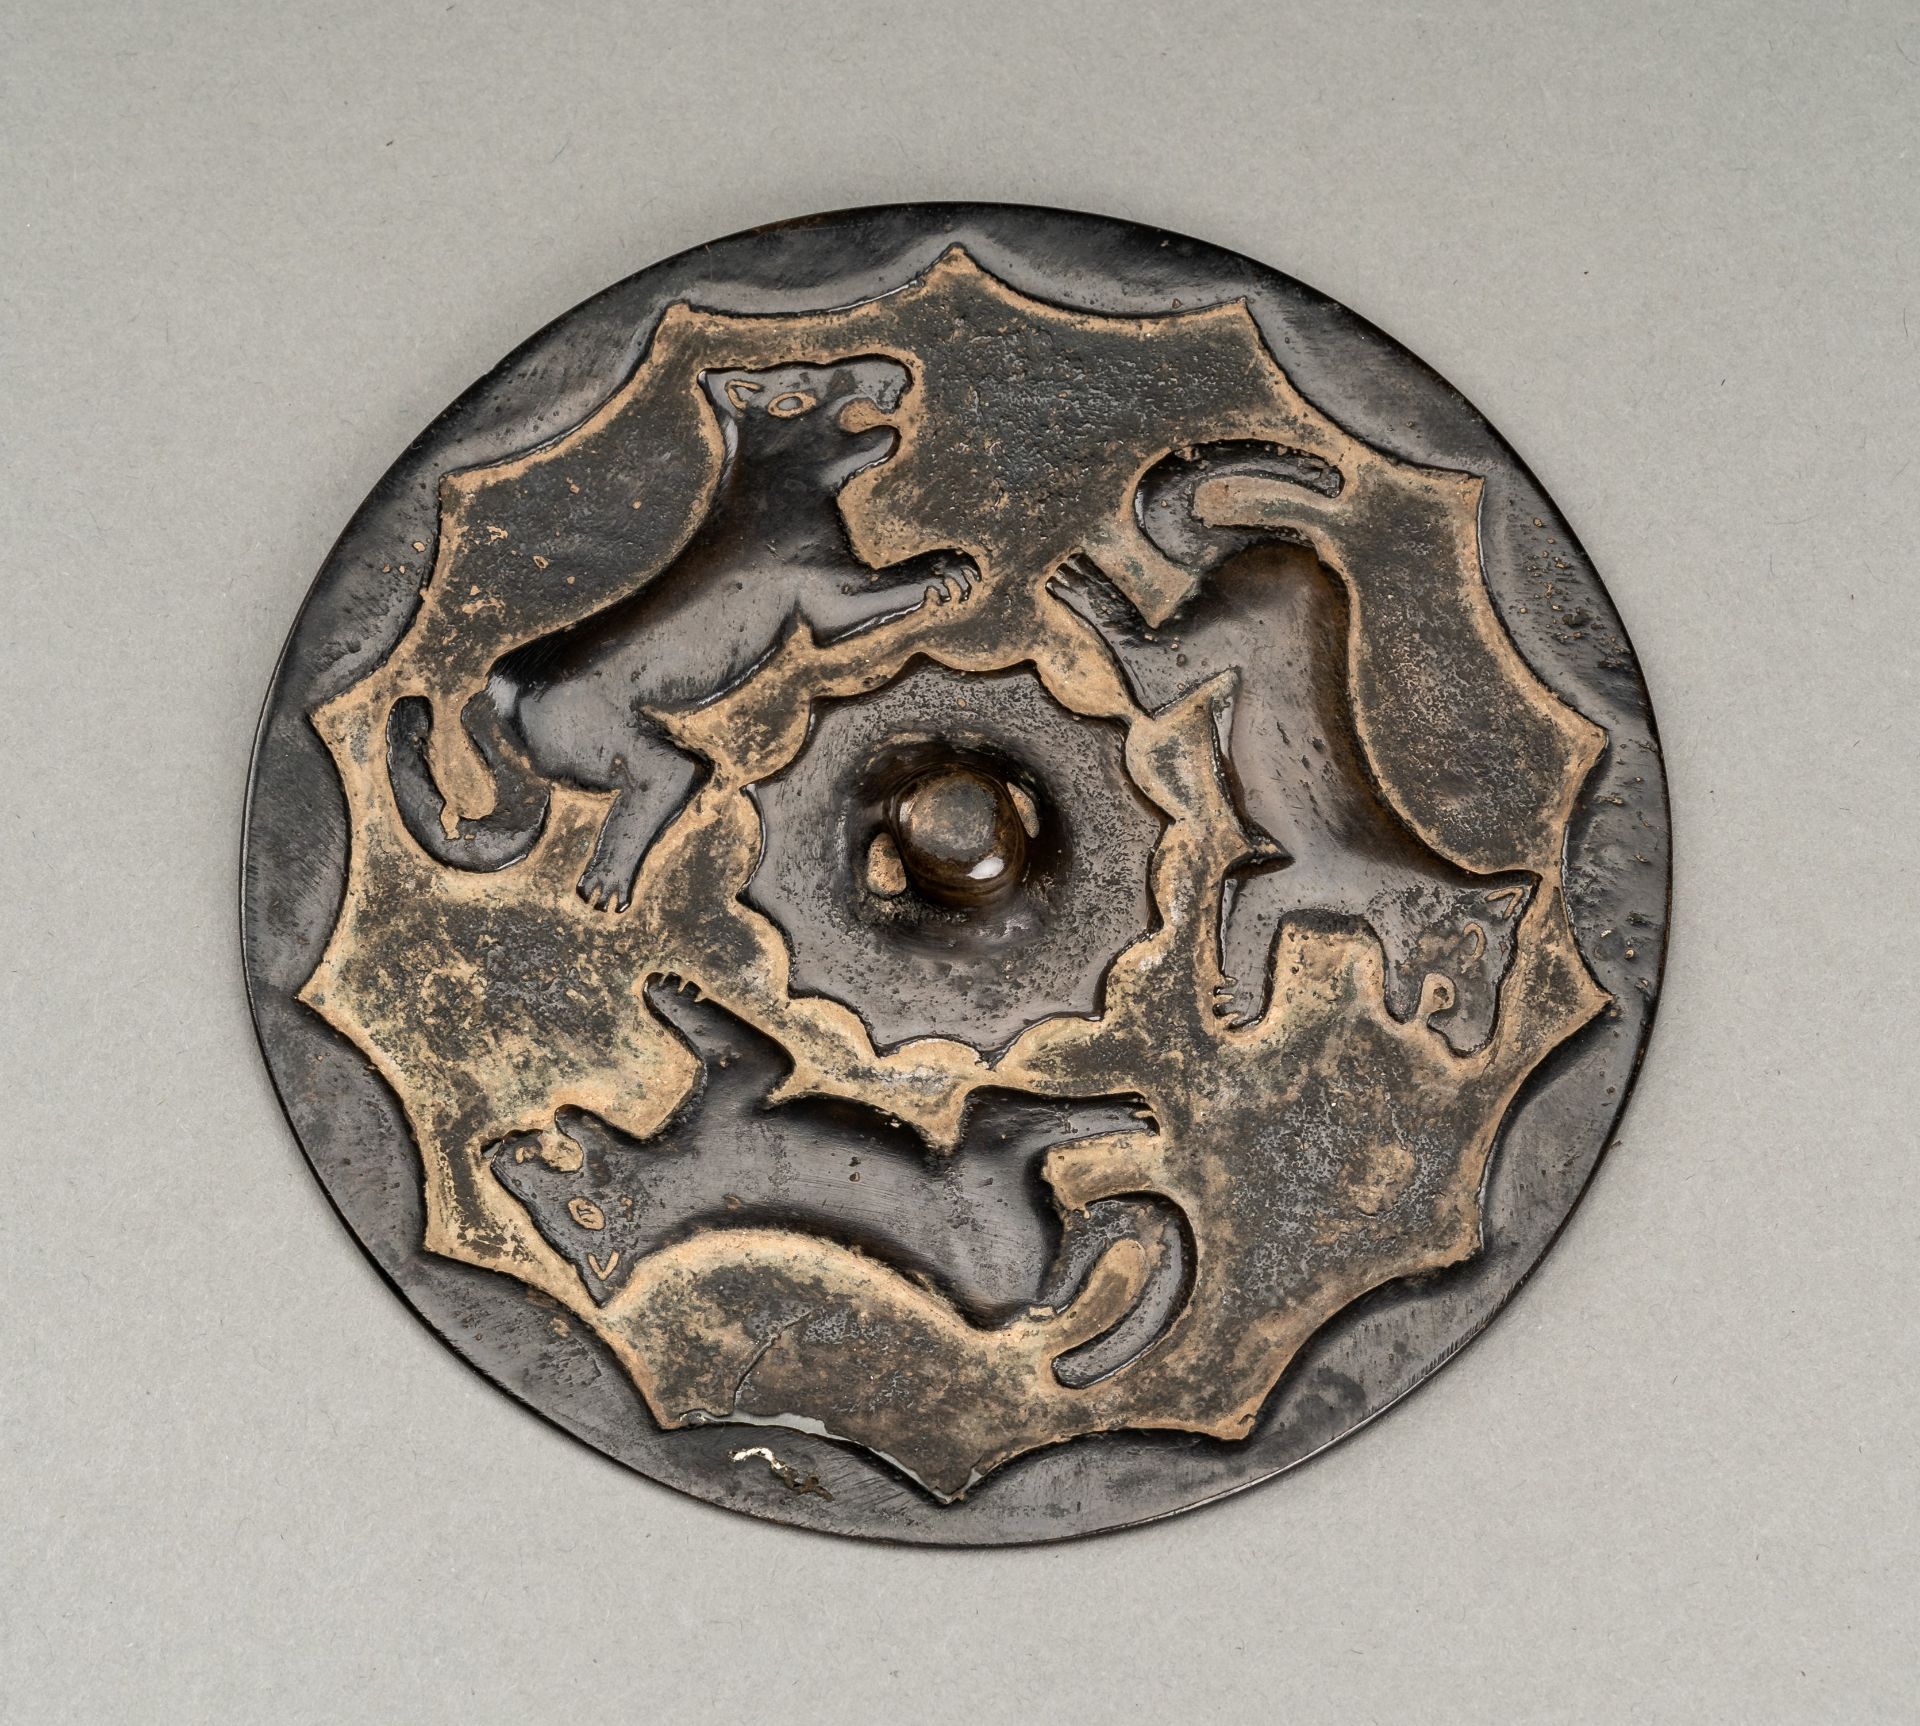 A RARE TANG DYNASTY BRONZE MIRROR WITH WOLFES